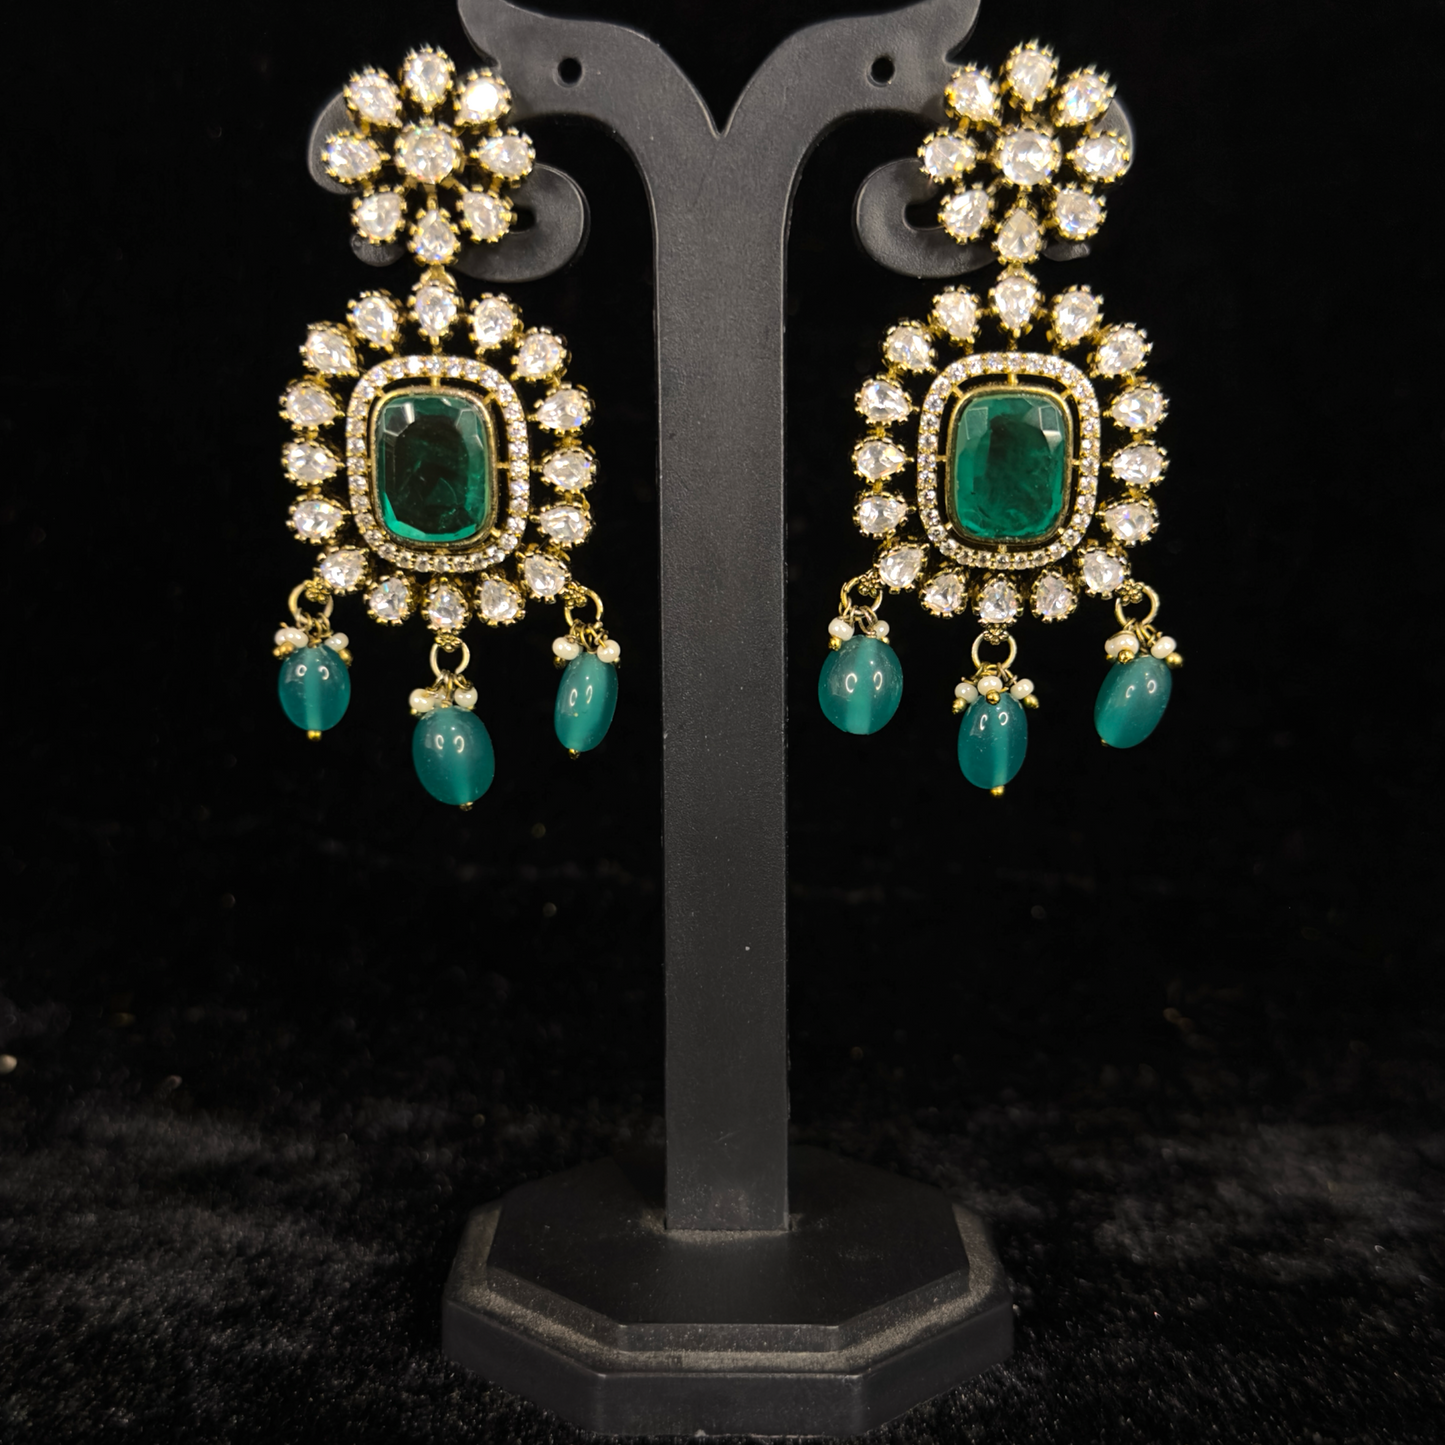 Exquisite Victorian Polki Earrings with onyx beads